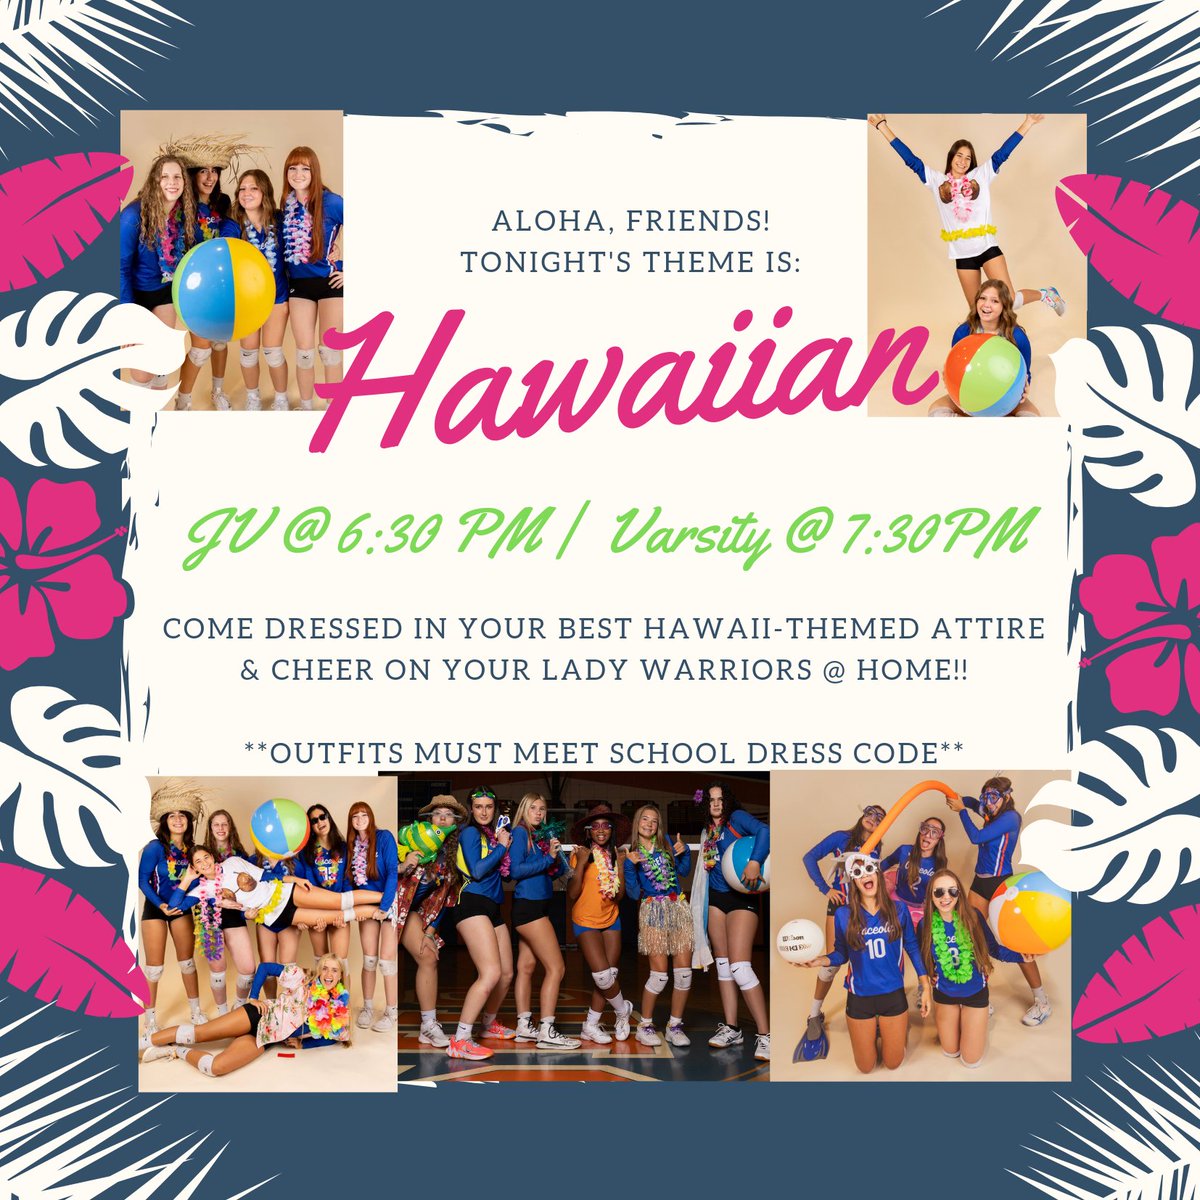 Aloha Fans! 🌺🌴 JV and Varsity are back in action tonight at Home in a Hawaiian-themed showdown vs. Academy of the Holy Names! JV kicks things off @ 6:30p.m. with Varsity to follow @ 7:30p.m. 🤙Mahalo for supporting our team!🤙 #WarriorNation #ladywarriors #warriorstrong #TRIBE